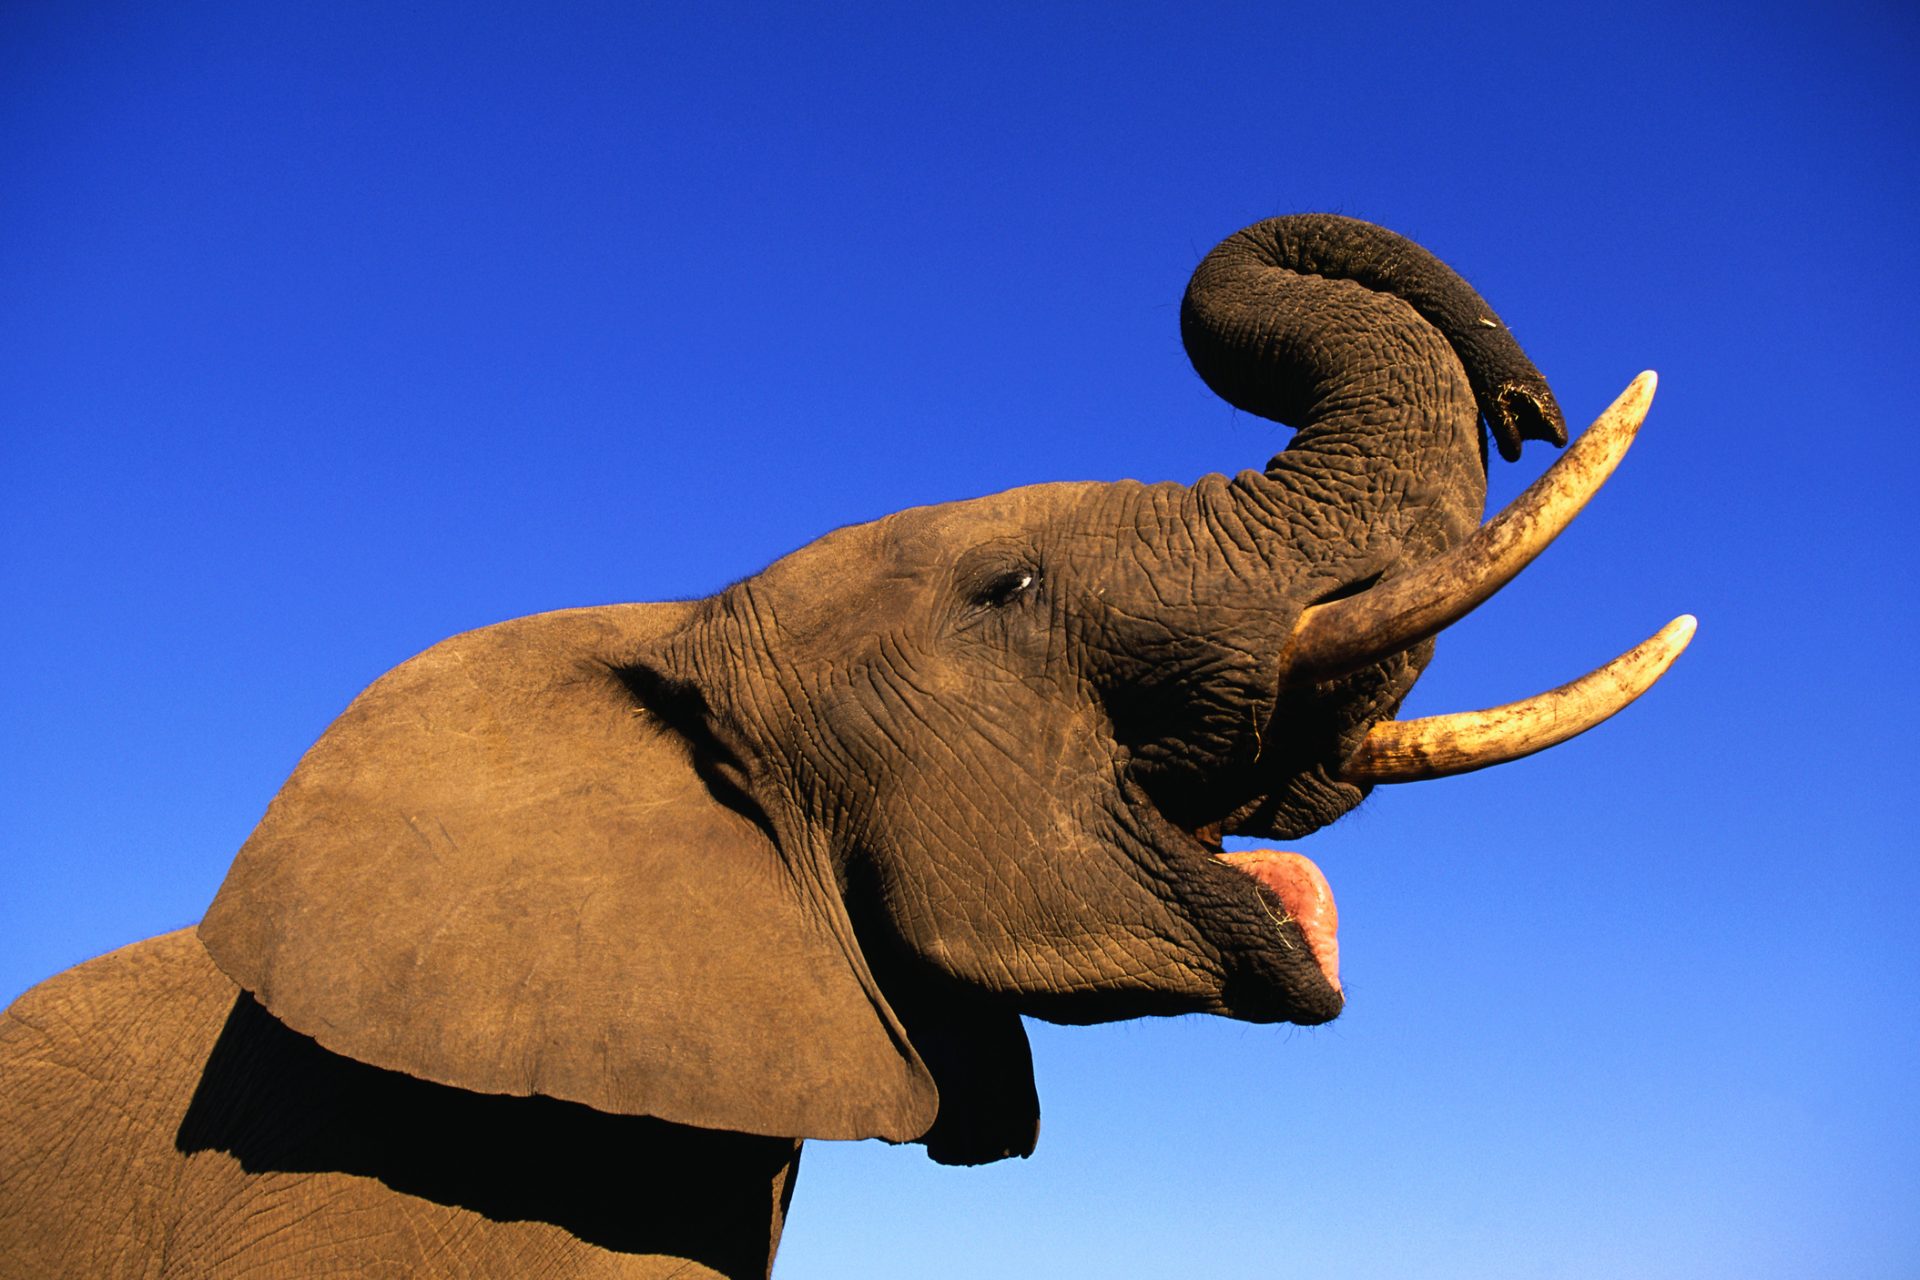 Could extra warm elephant genitalia be the key to curing cancer? 